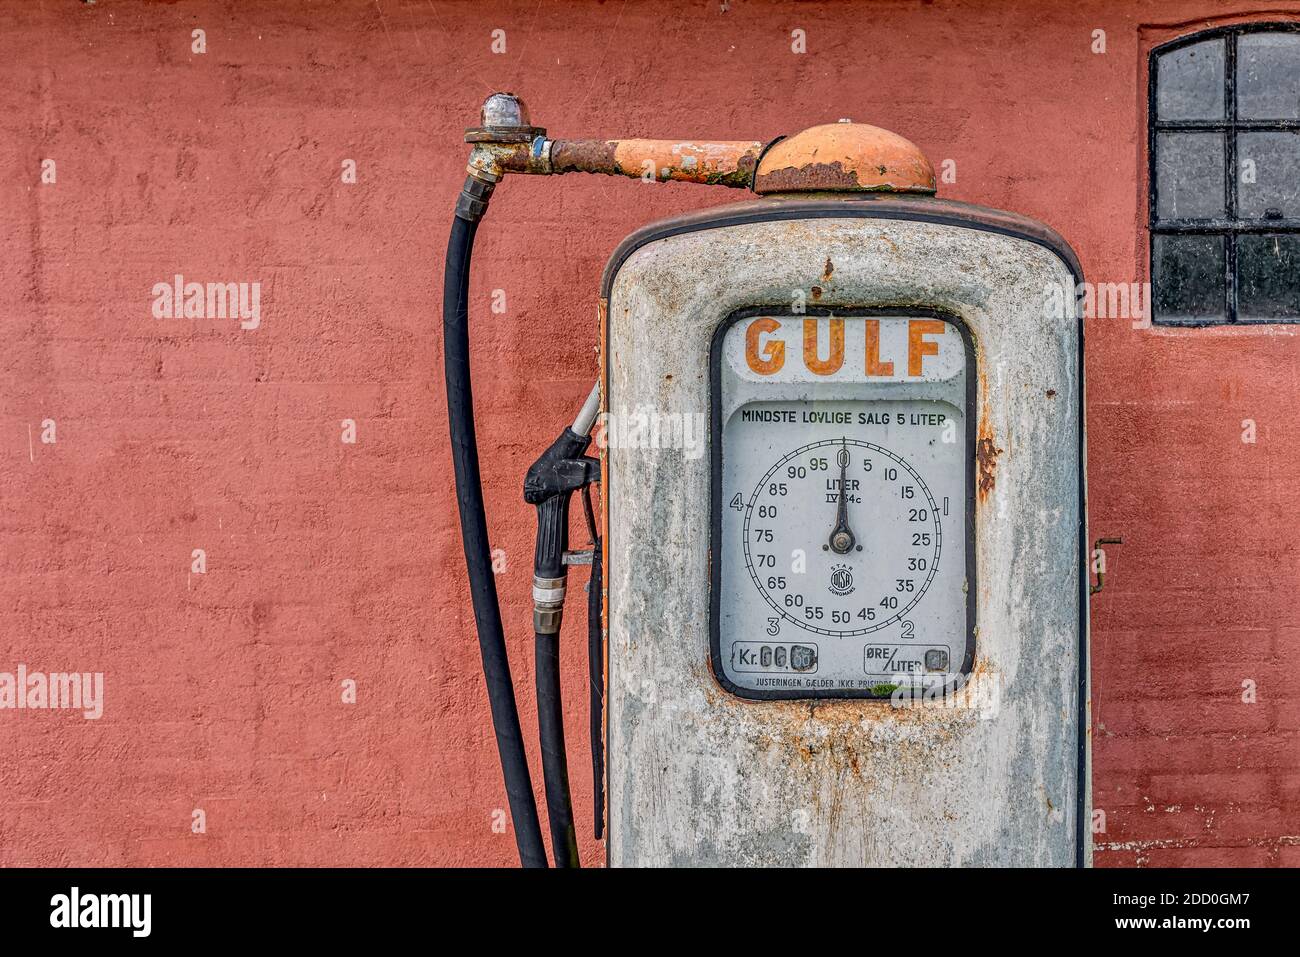 a rusty abandoned gas pump for Gulf petrol against a red painted brick wall, Holl, Denmark, November 15, 2020 Stock Photo